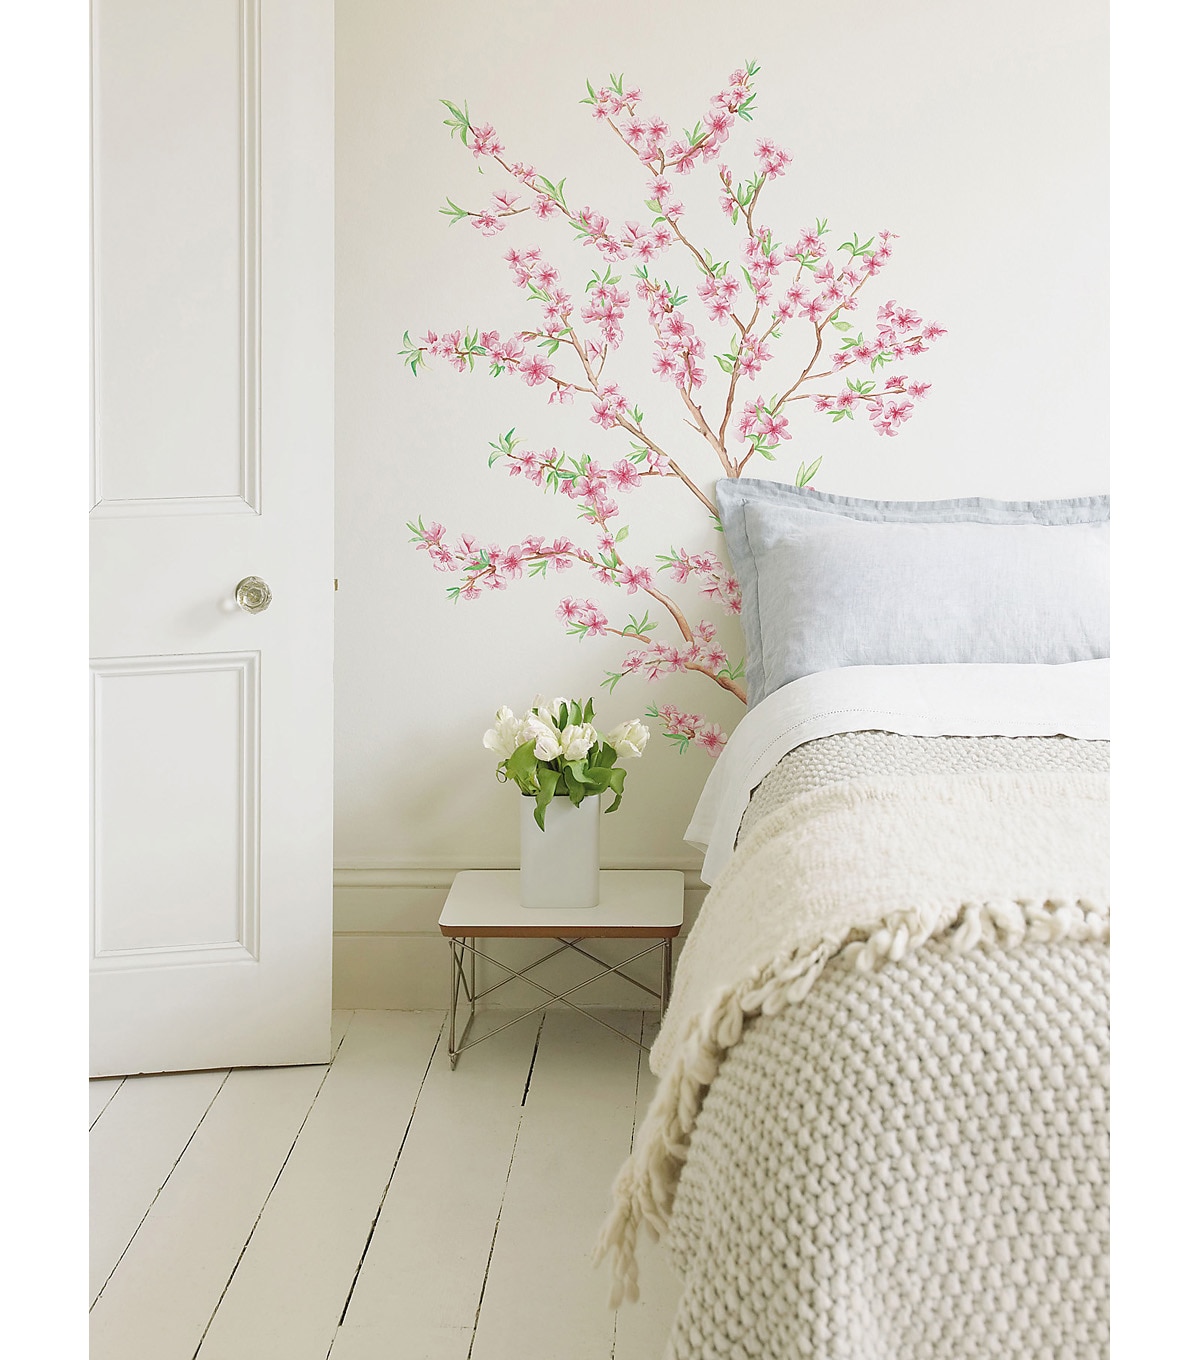 Home Decor Decals : Hallway Flower 3D Acrylic Wall Stickers Decals Poster Home ... - Shop for many home vinyl wall decals, sayings and home wall quotes for wall decor, including decals for the home make a powerful impact as home decorations without hurting your pocketbook.